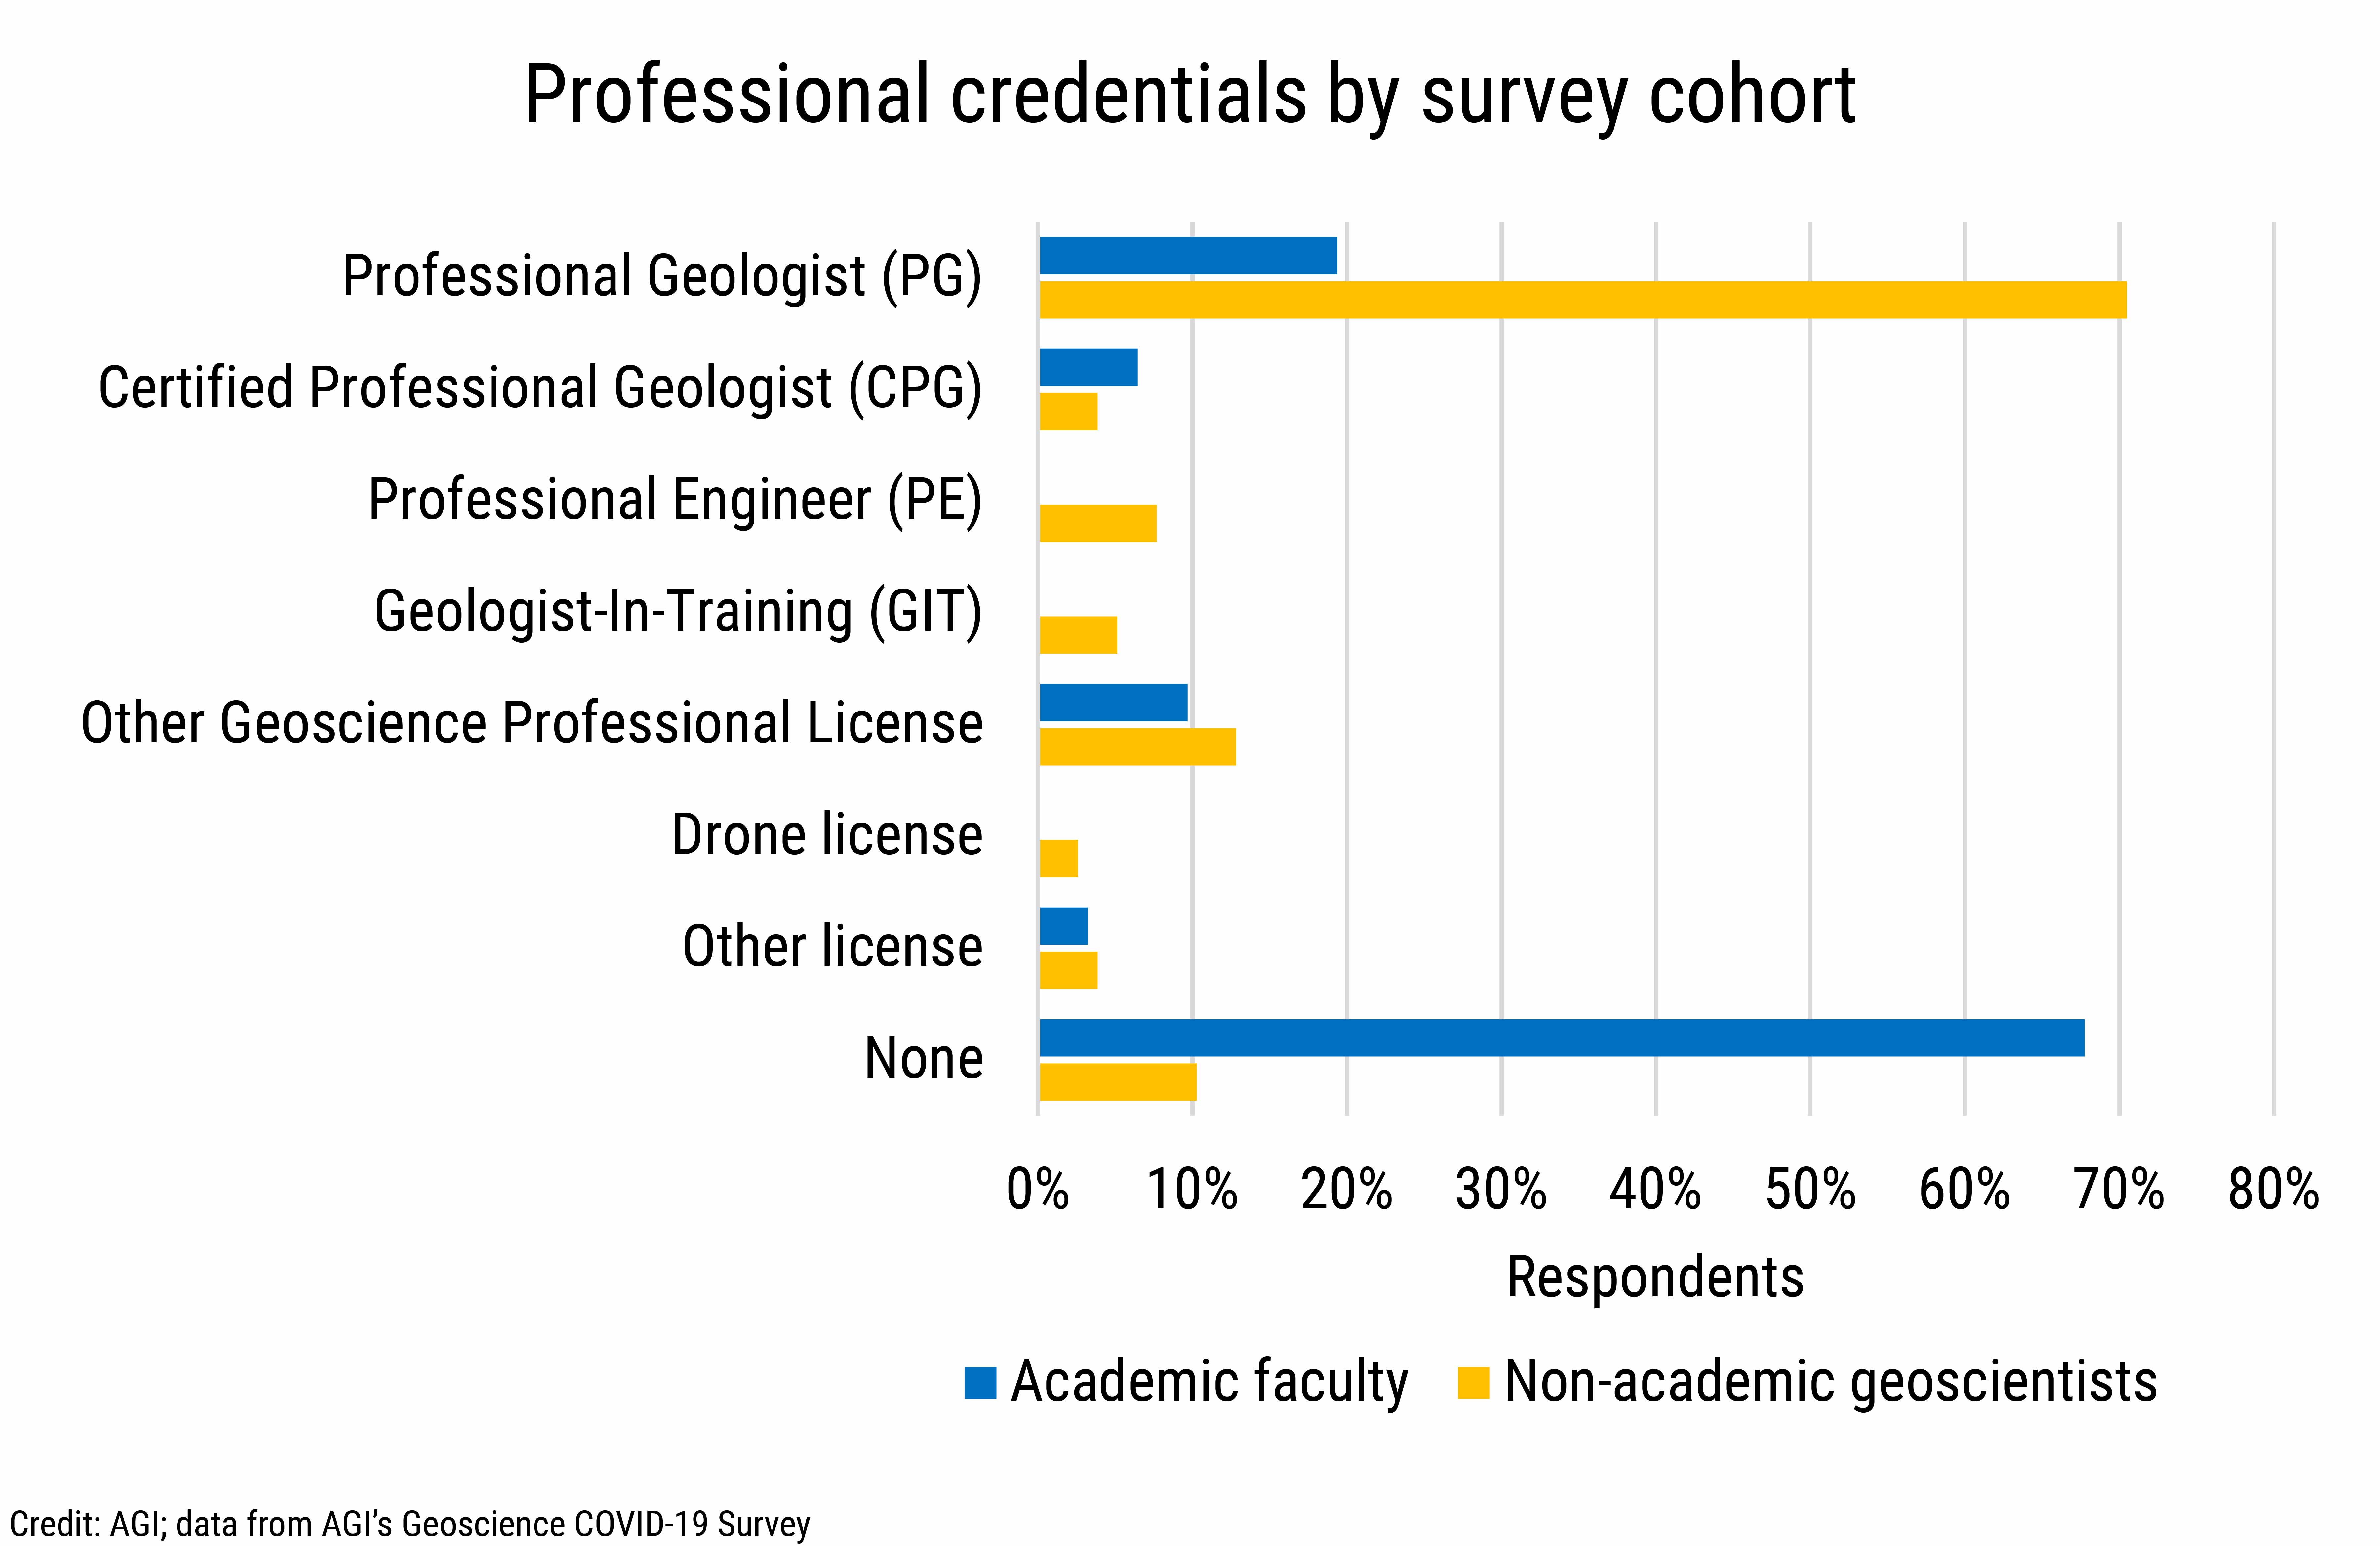 DB_2021-025 chart 01: Professional credentials by survey cohort (Credit: AGI; data from AGI's Geoscience COVID-19 Survey)